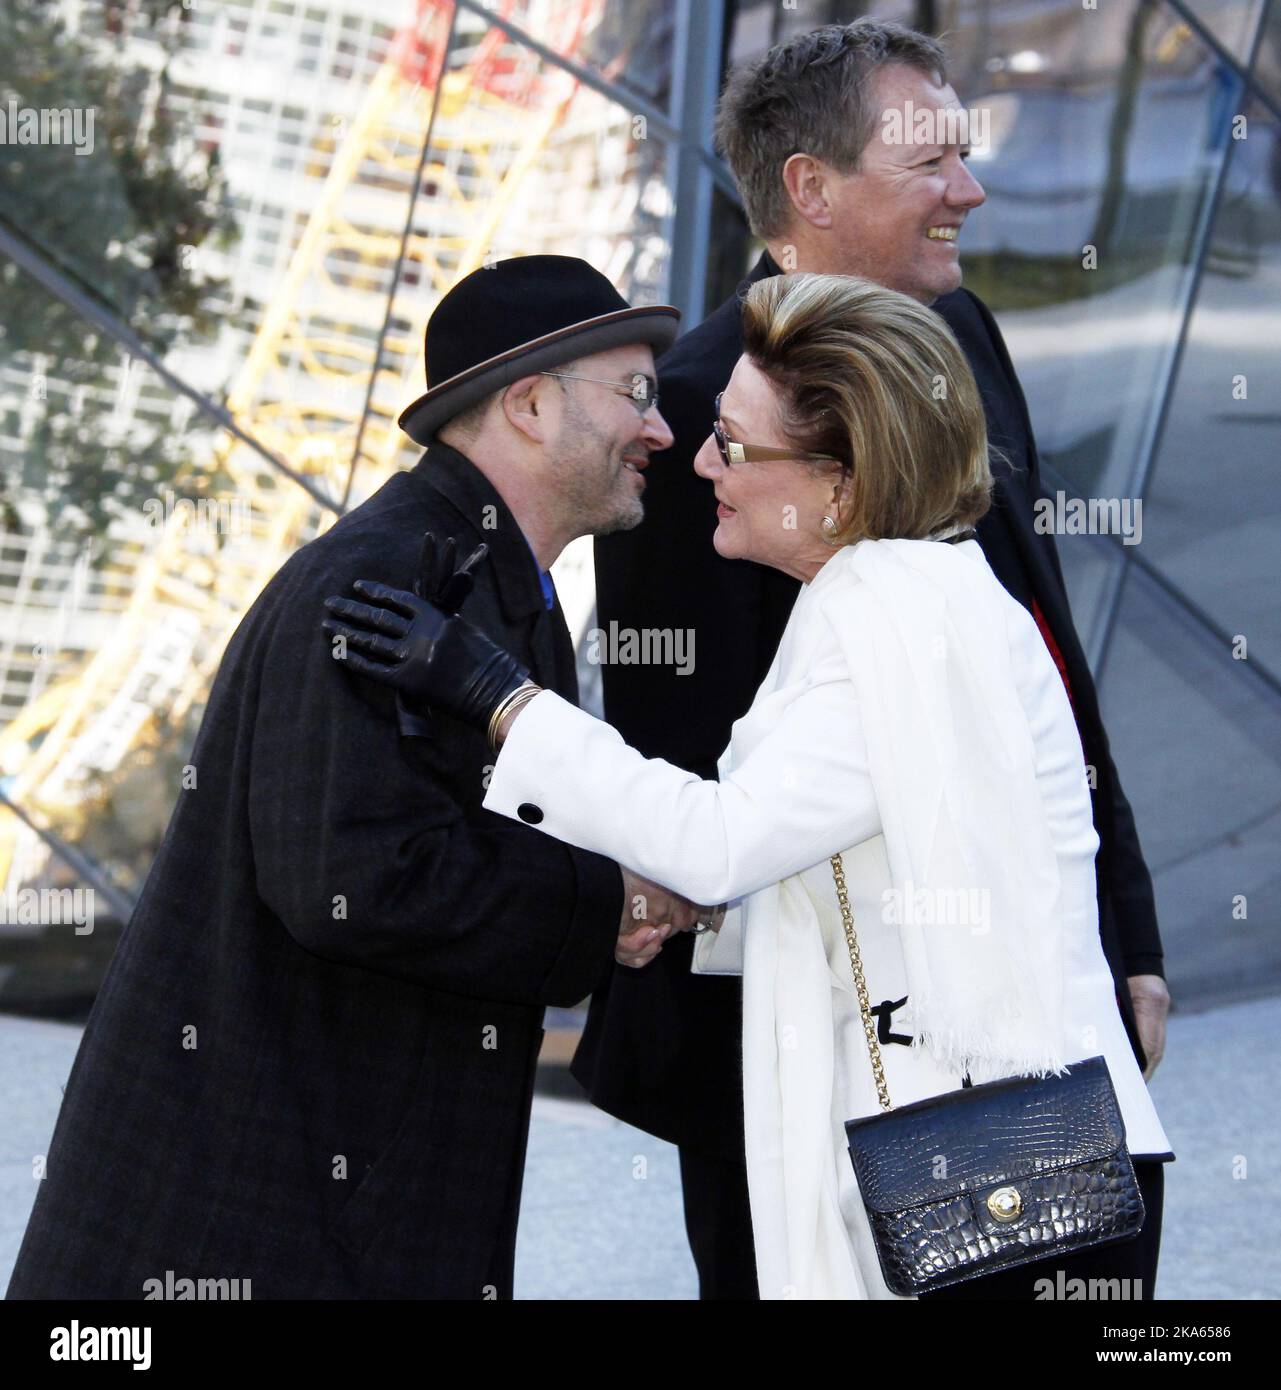 Norwgian Queen Sonja and Craig Dykers, Snoehetta Achitects, pictured near the plaque with inscribed names of the 9/11 victims at Ground Zero in New York Friday October 21, 2011. Photo Lise Aserud / Scanpix Norway / POOL Stock Photo